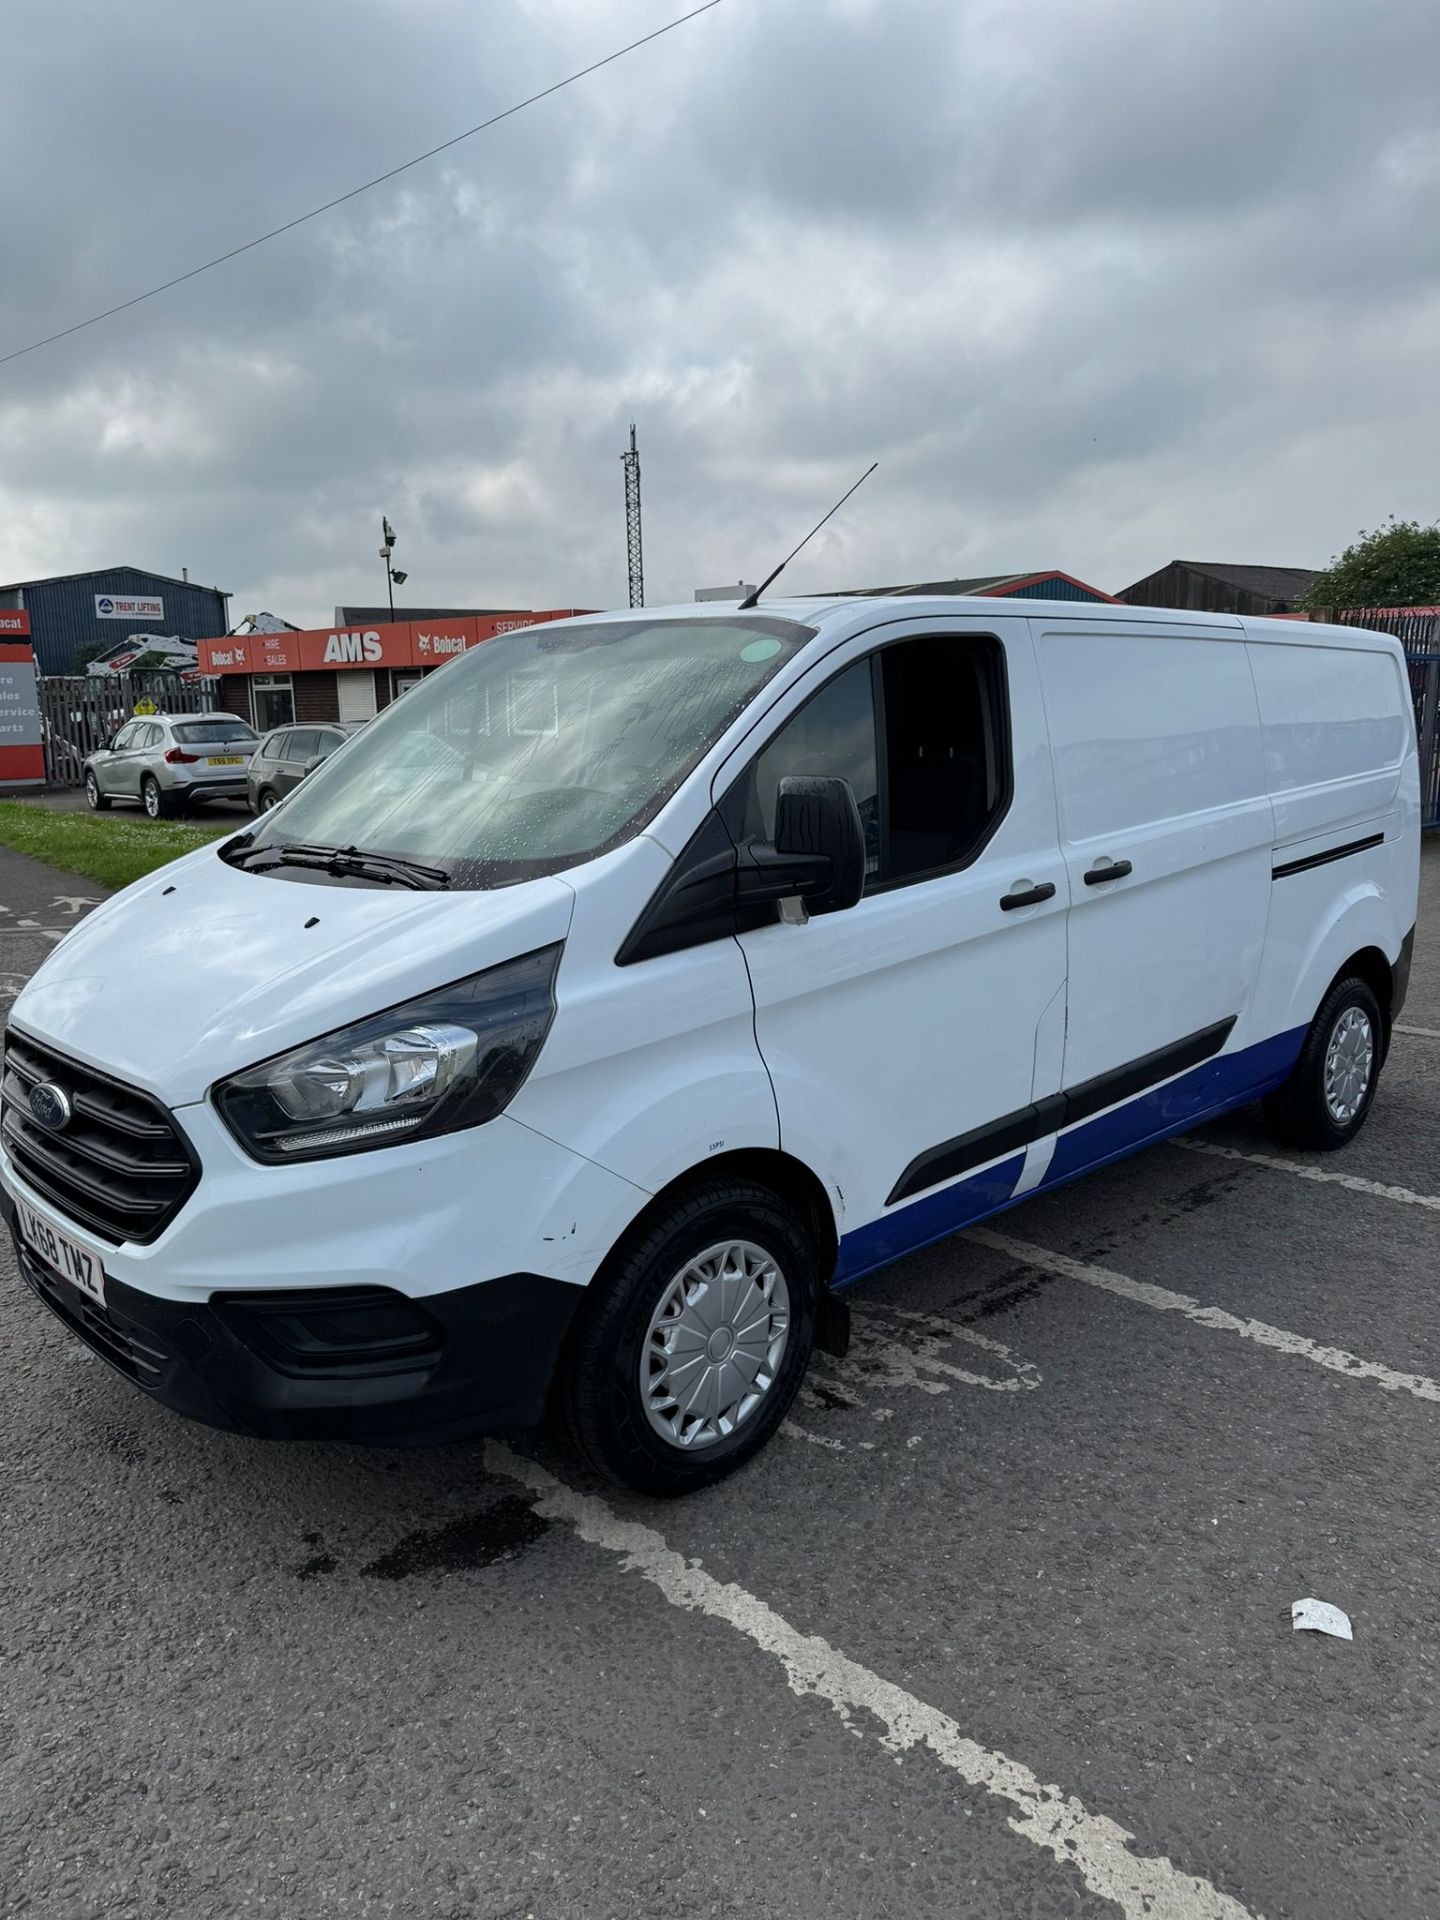 2019 68 FORD TRANSIT CUSTOM LWB PANEL VAN - 84K MILES - AIR CON - PLY LINED - EURO 6 - Image 4 of 12